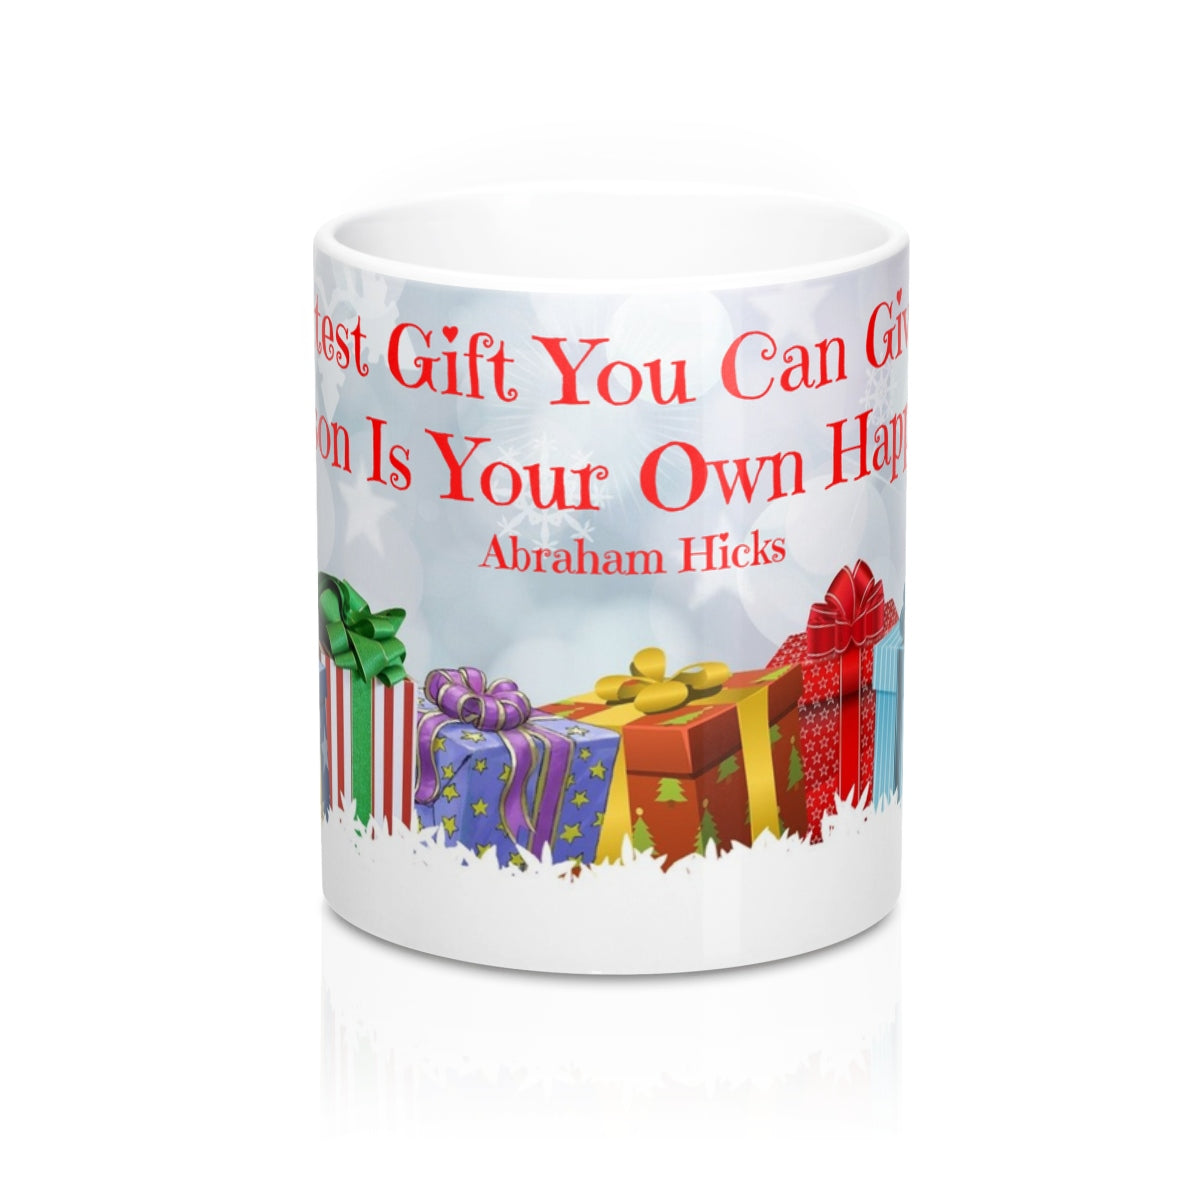 Give the Greatest Gift of All - Abraham Hicks Law Of Attraction Quote  -Mug 11oz